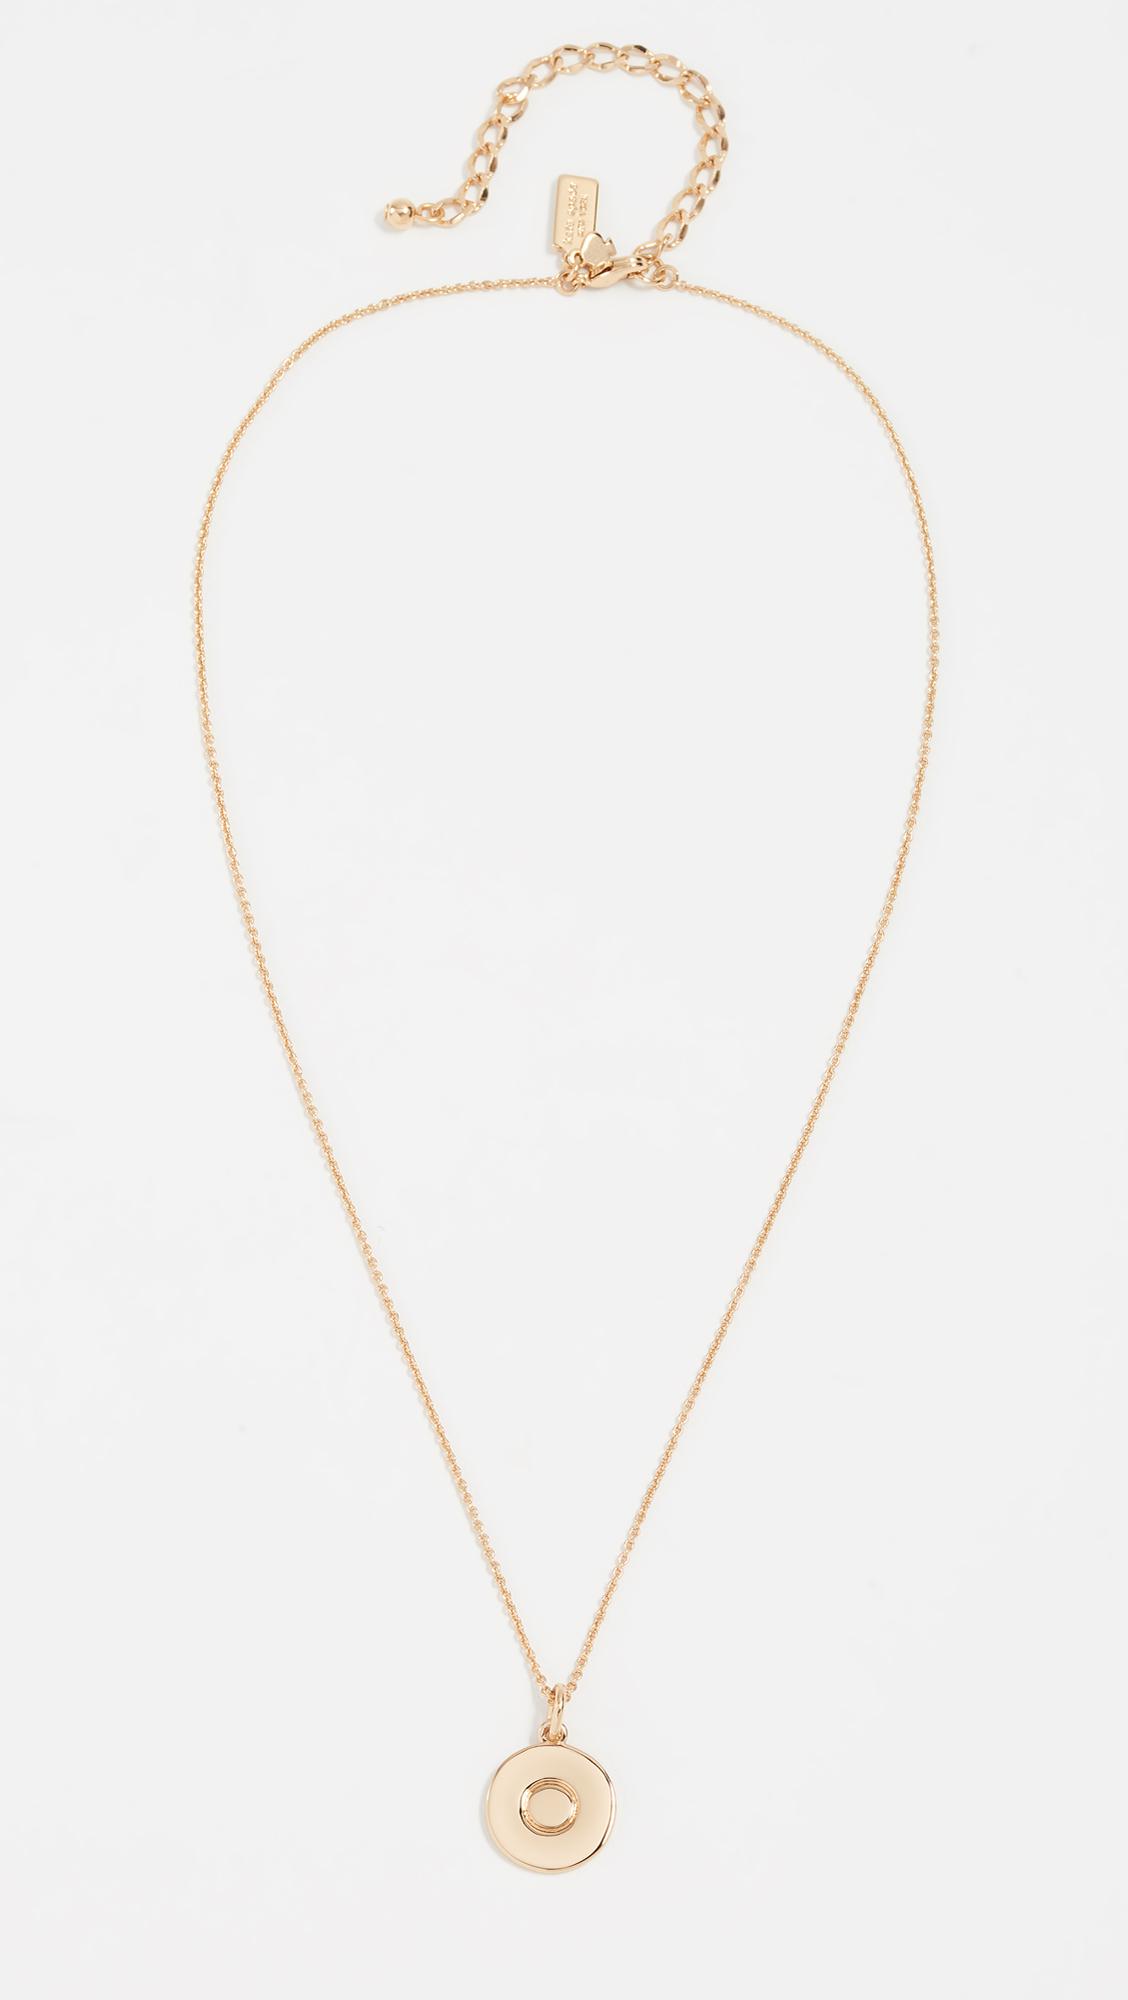 Kate Spade Letter Pendant Necklace in o (Metallic) - Lyst